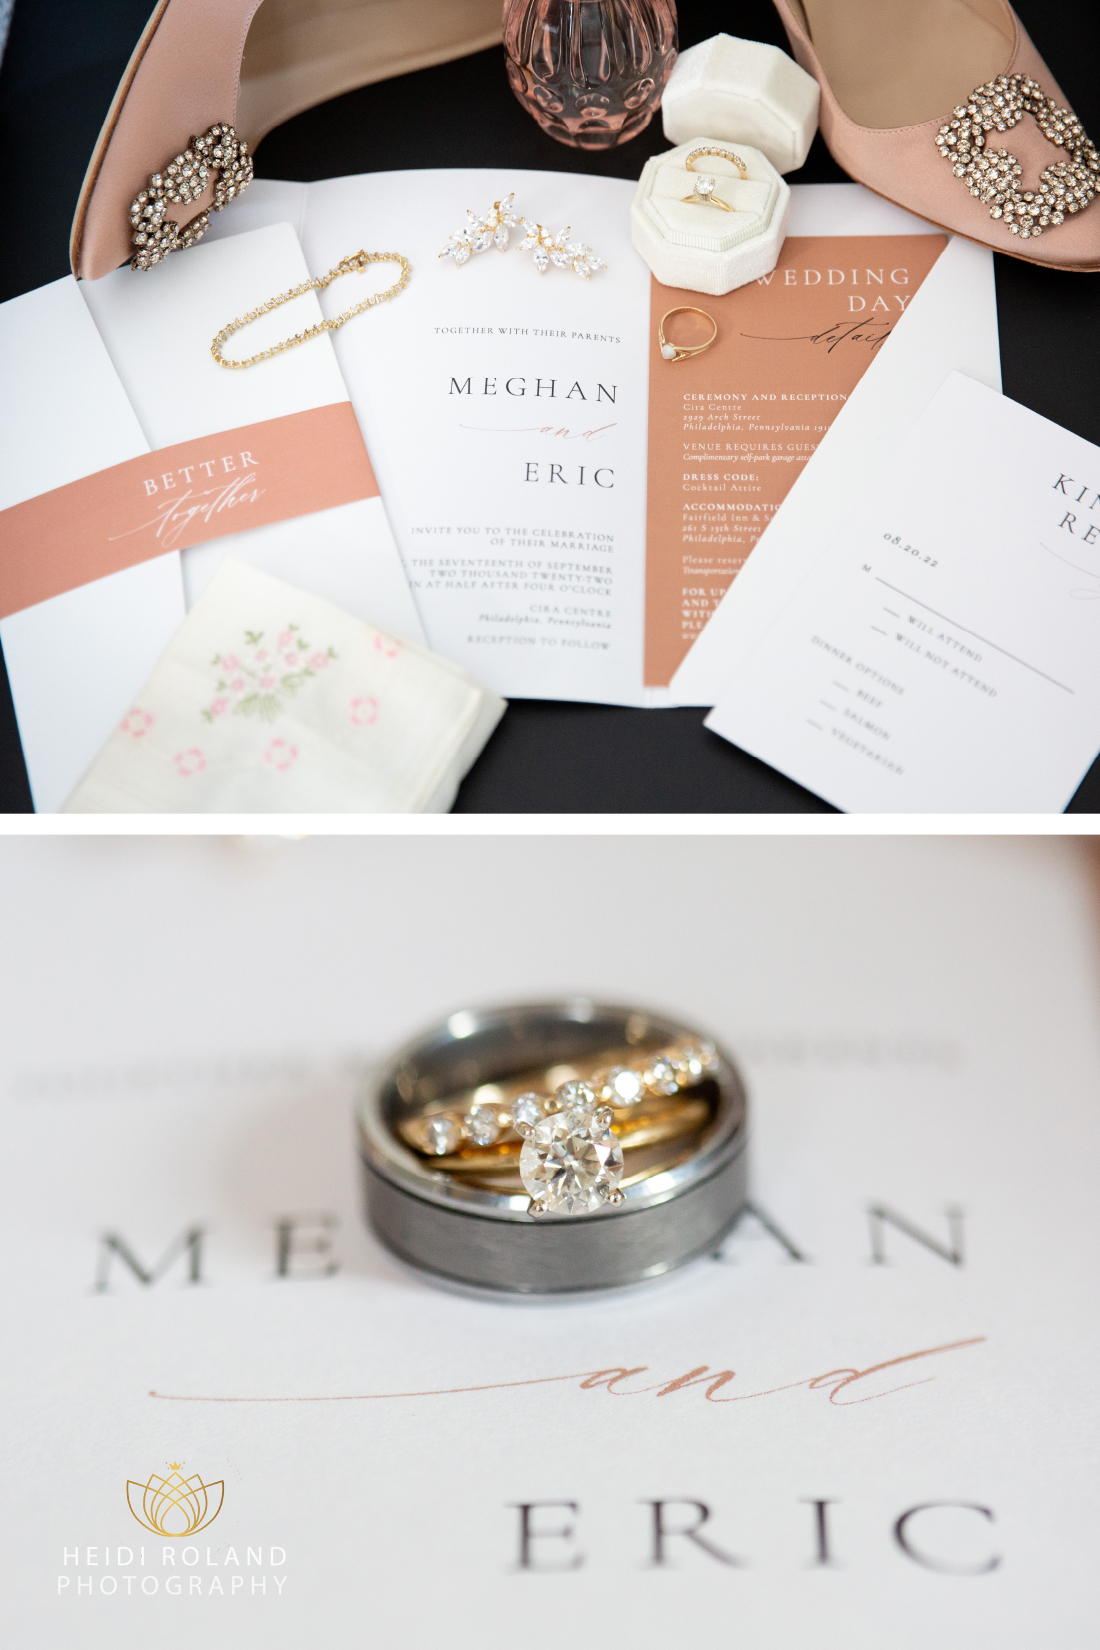 wedding day details including shoes, rings and invitations for cira centre wedding